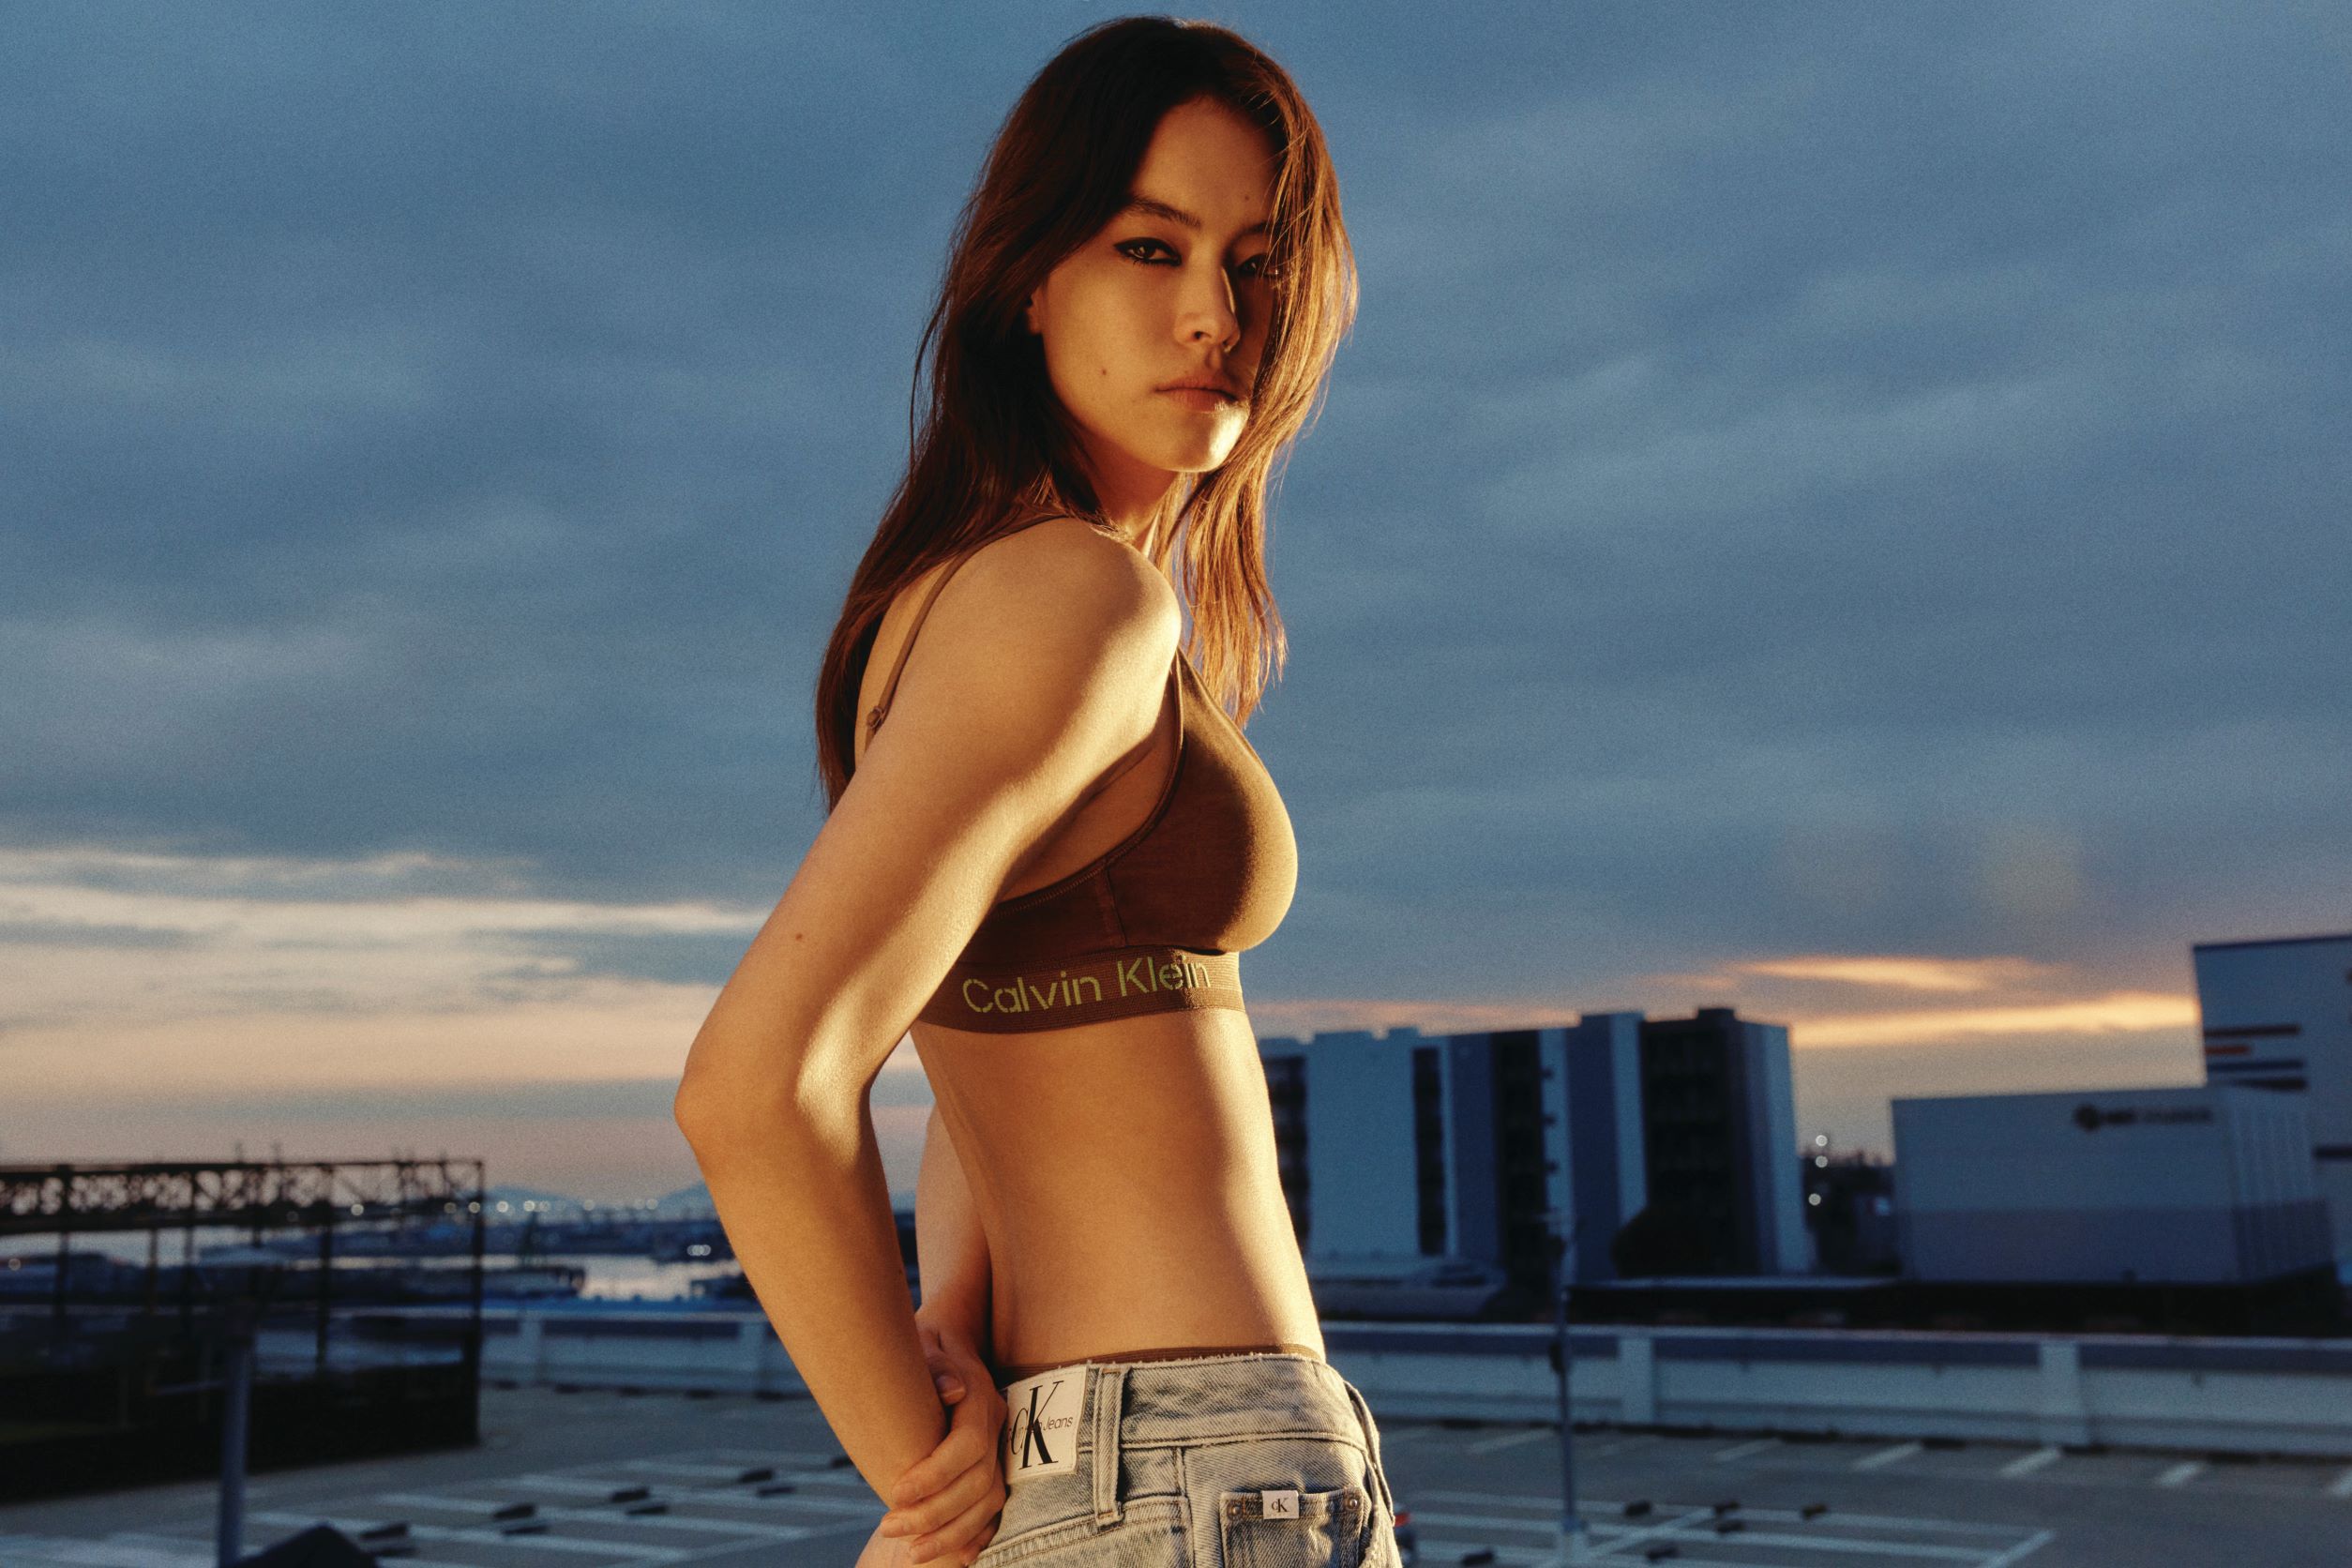 Calvin Klein Unveils Fall Underwear Campaign In Asia Hong Kong Times Square